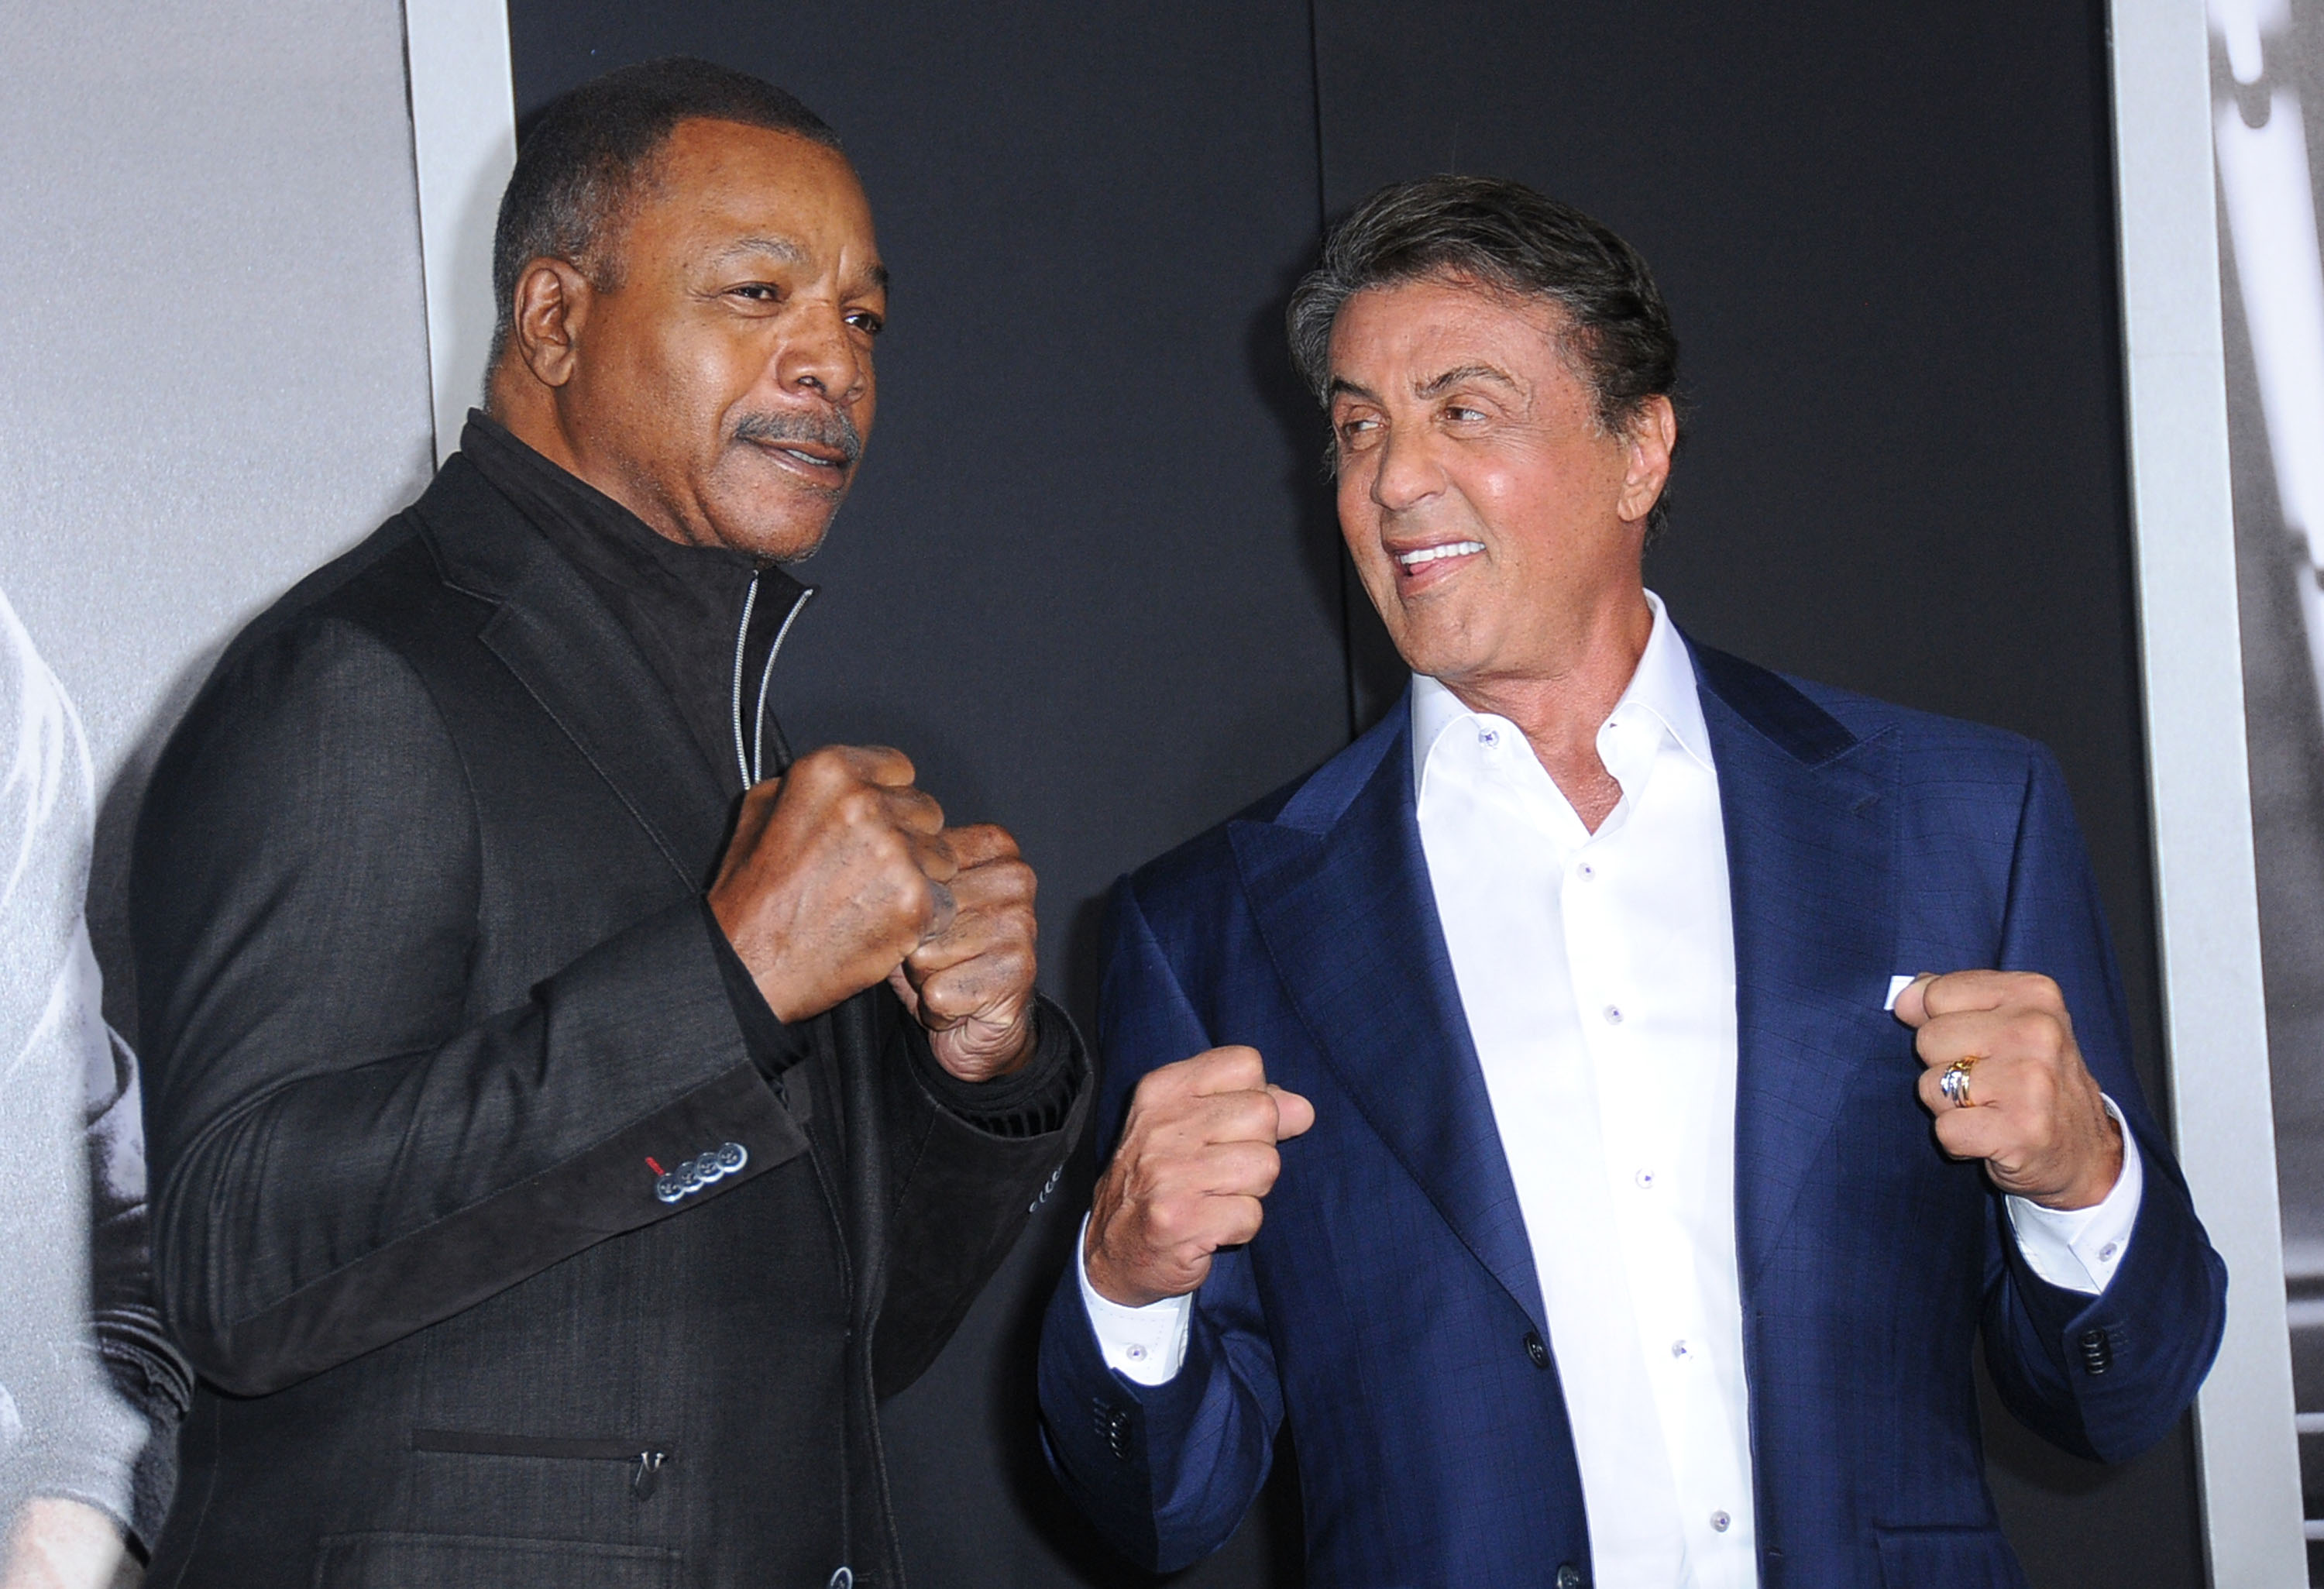 Carl Weathers and Sylvester Stallone at the Premiere Of Warner Bros. Pictures' 'Creed' on November 19, 2015 in Westwood, California | Source: Getty Images